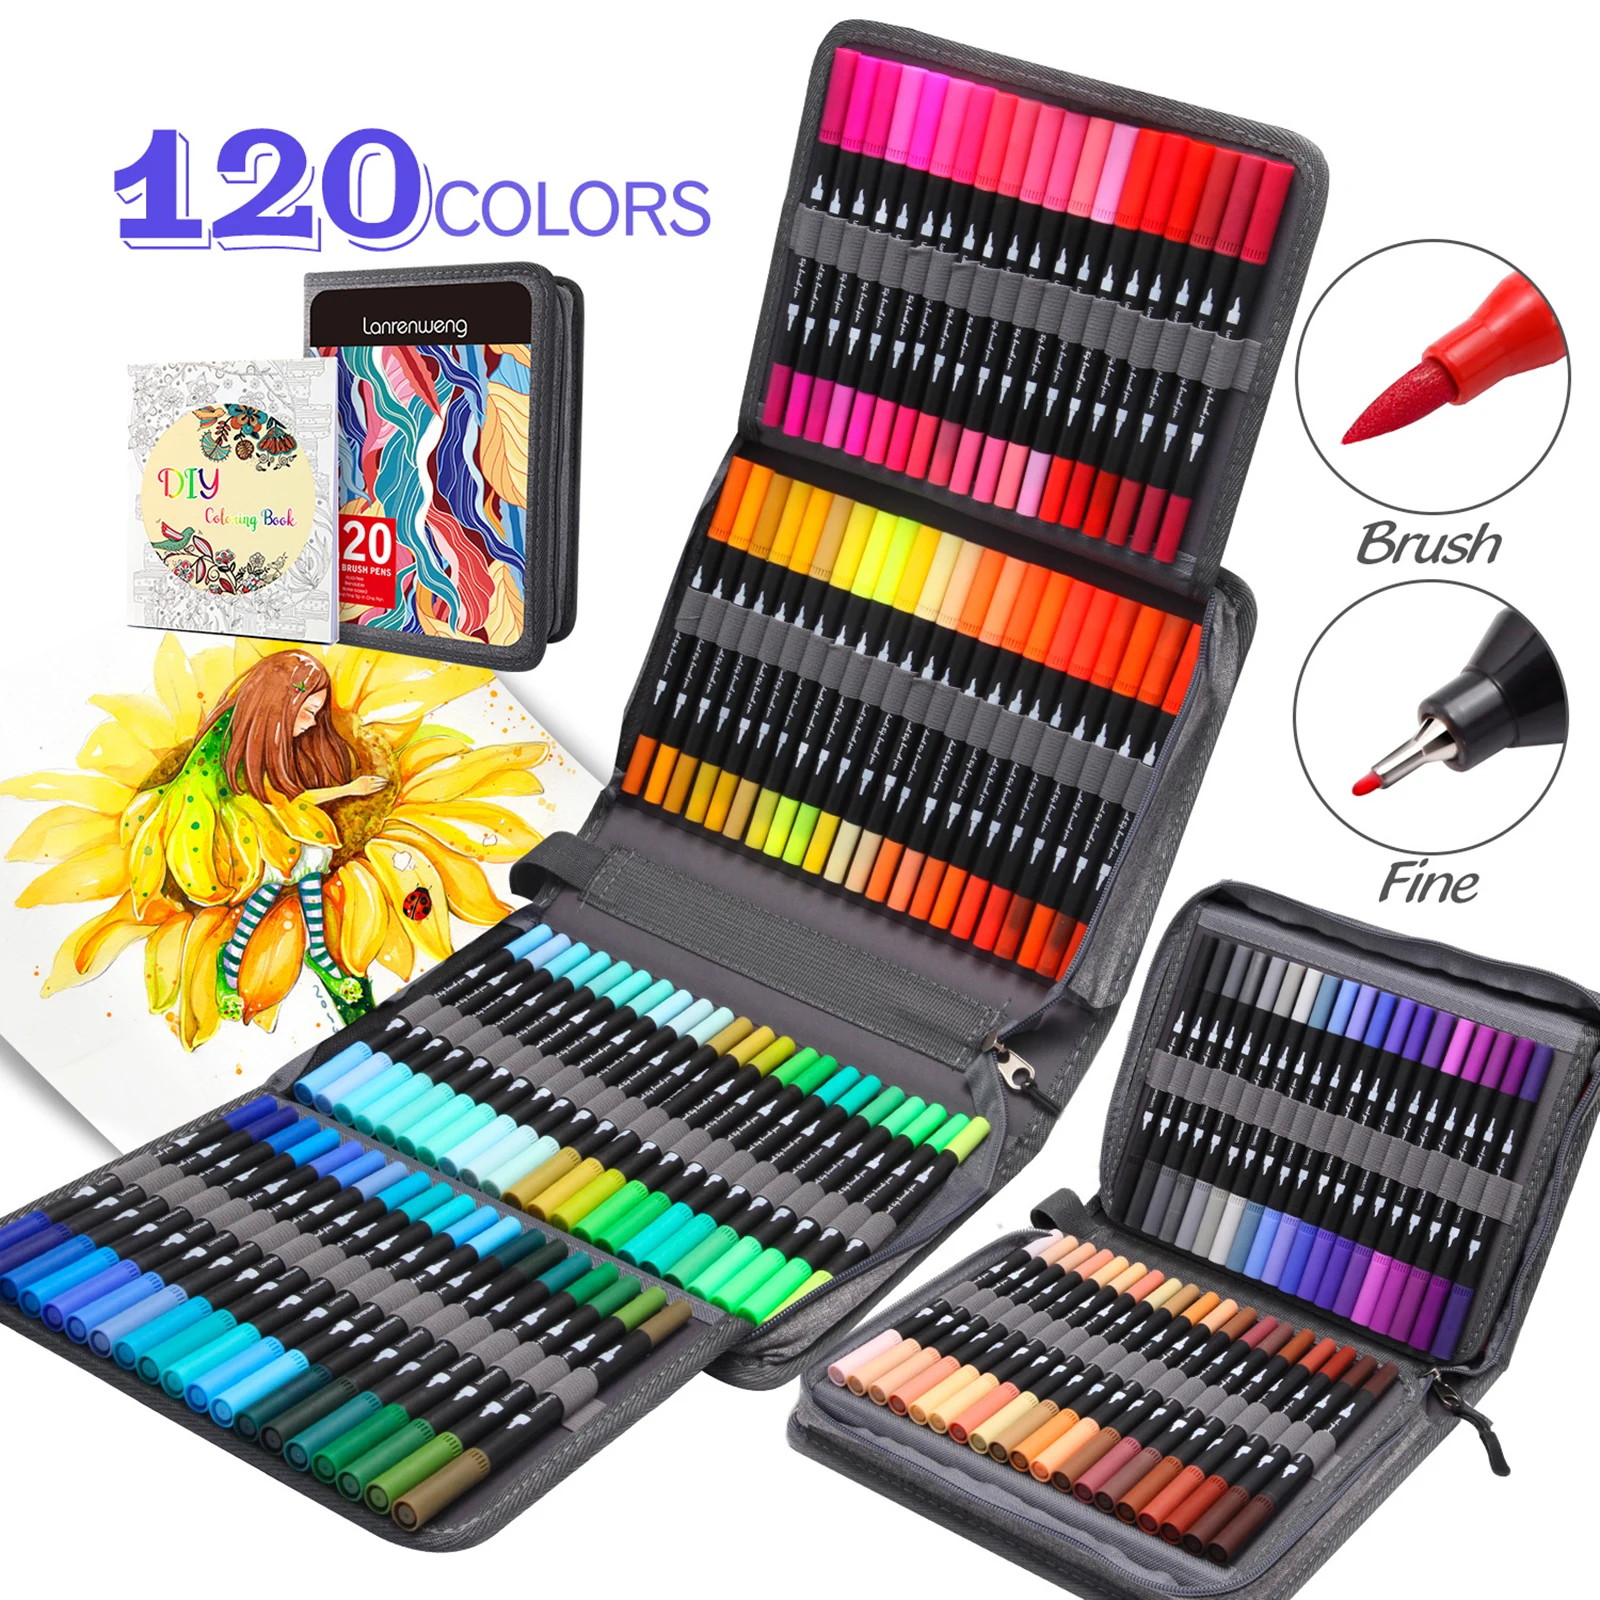 120Color Dual Tip Brush Pen Drawing Paint Markers for Calligraphy Bullet Journal Painting DIY Art Crafts Office School